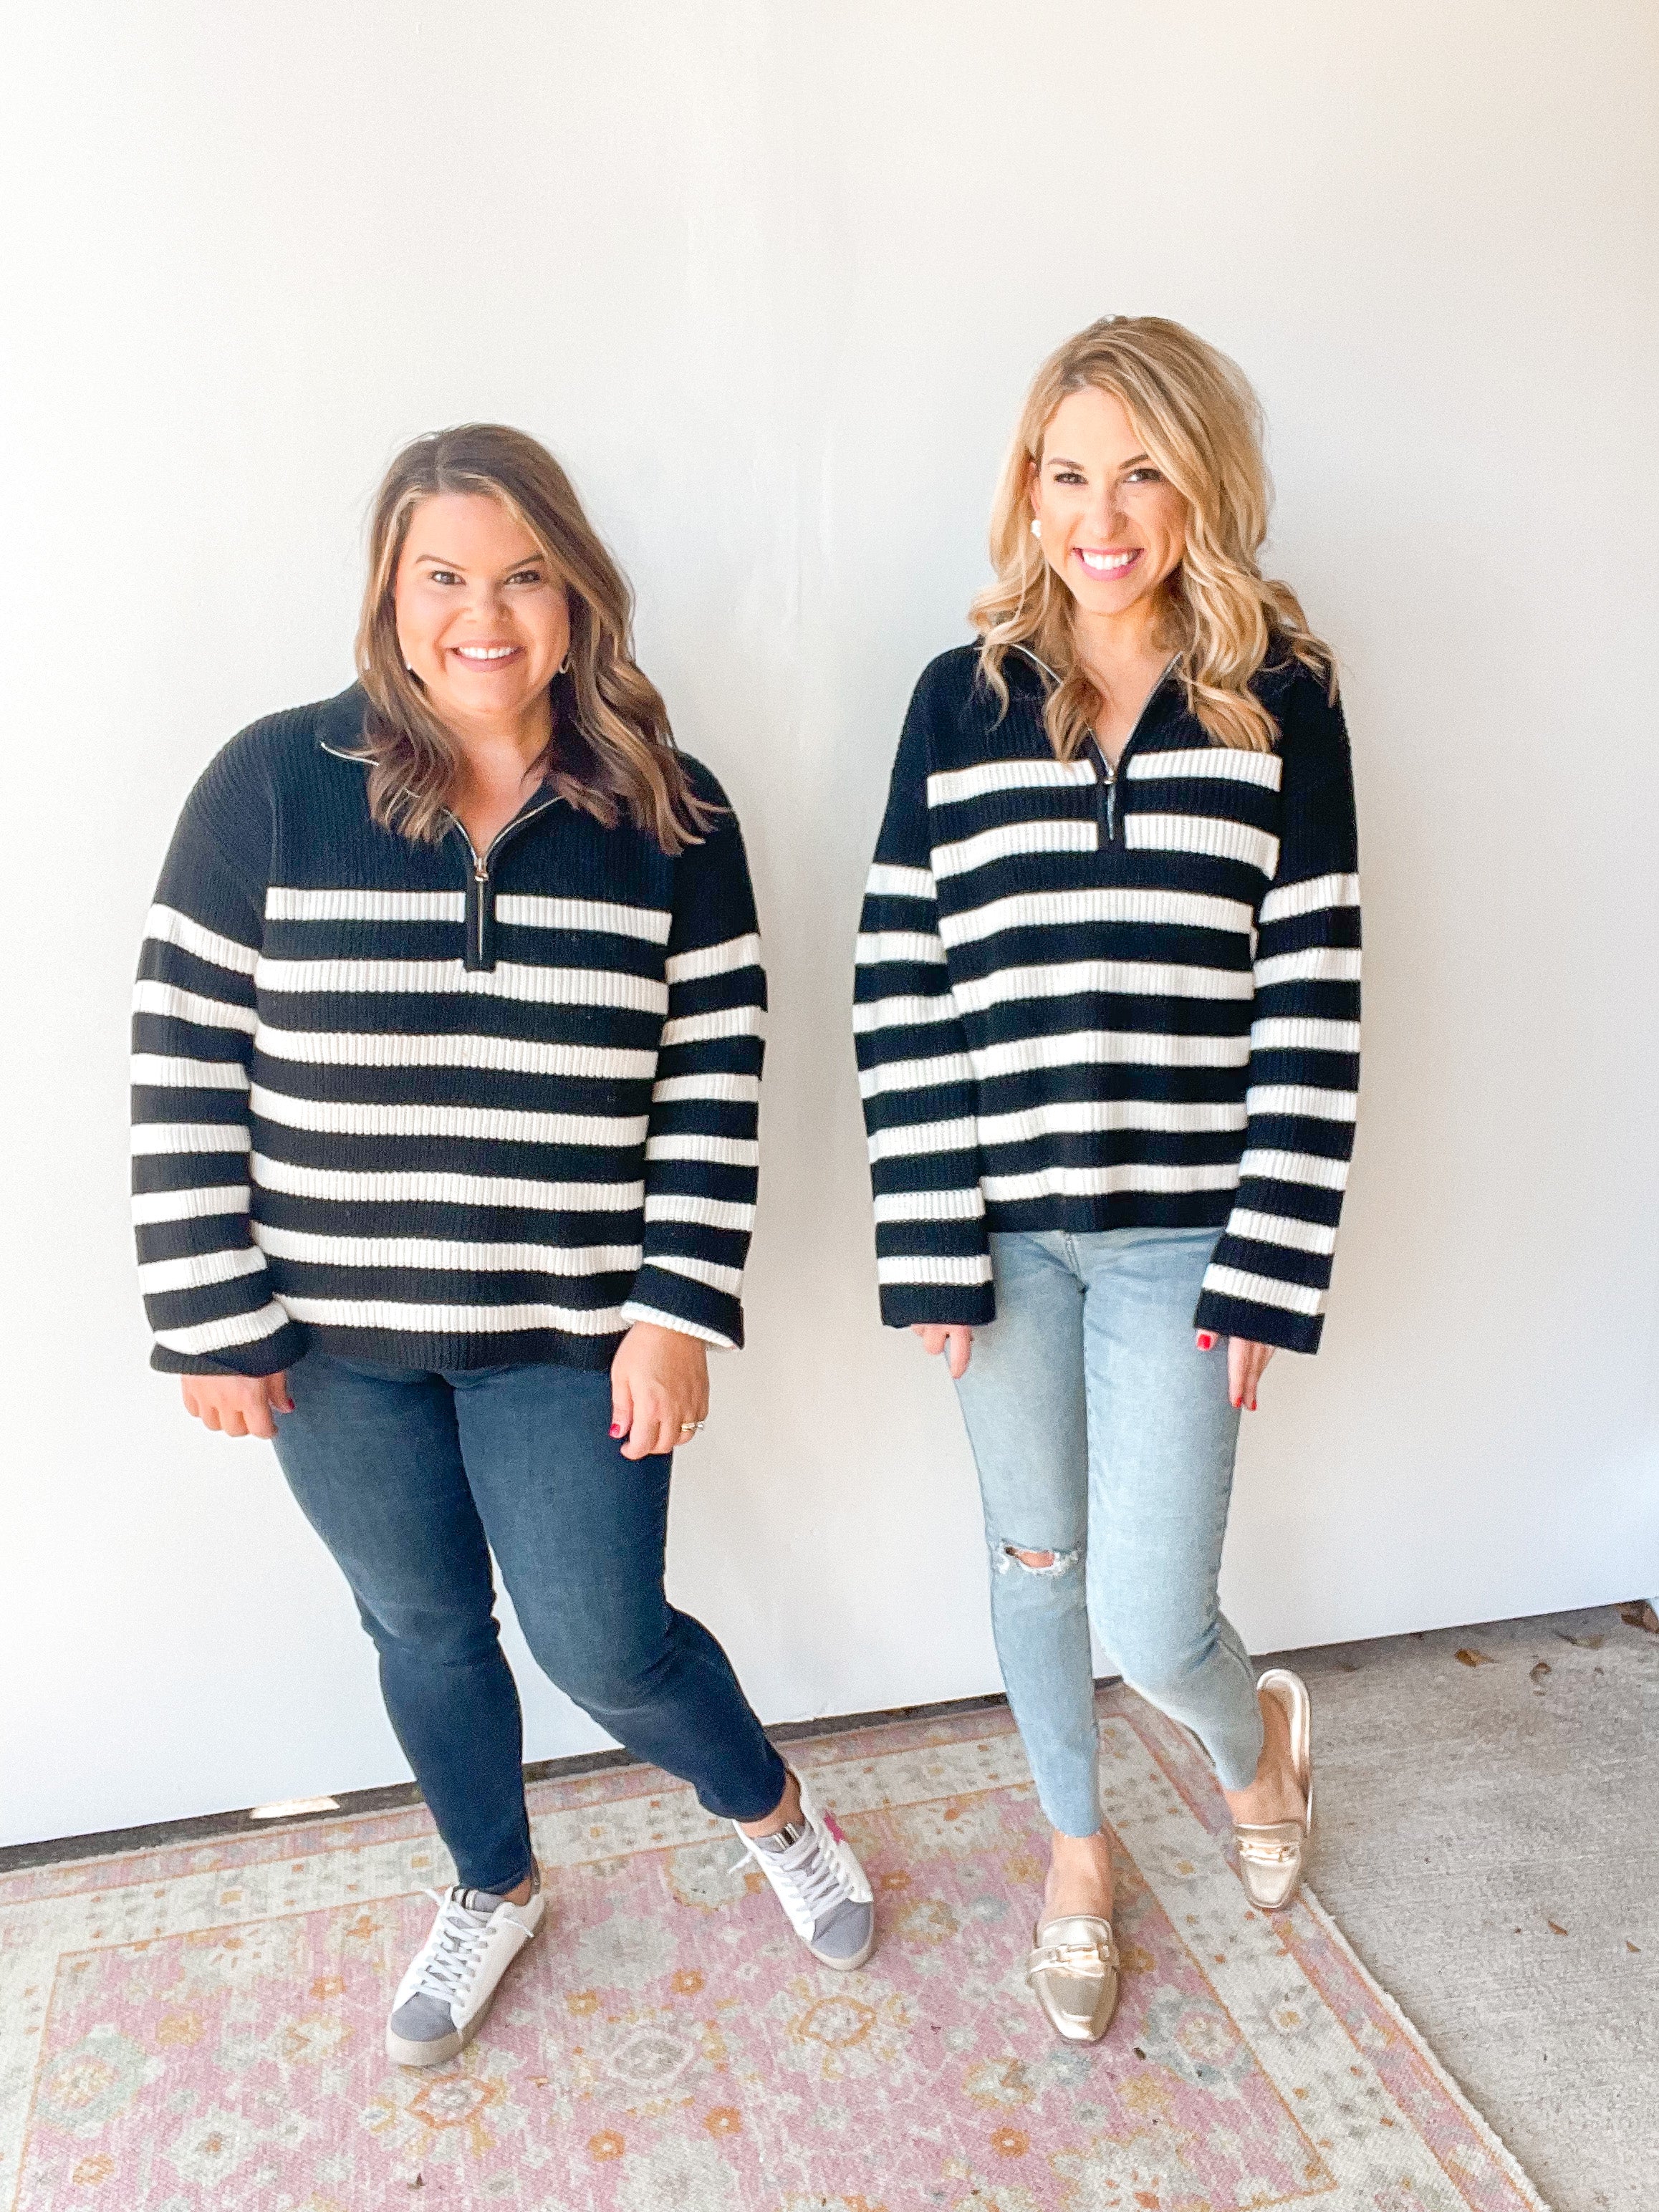 Rosa Black and White Pullover